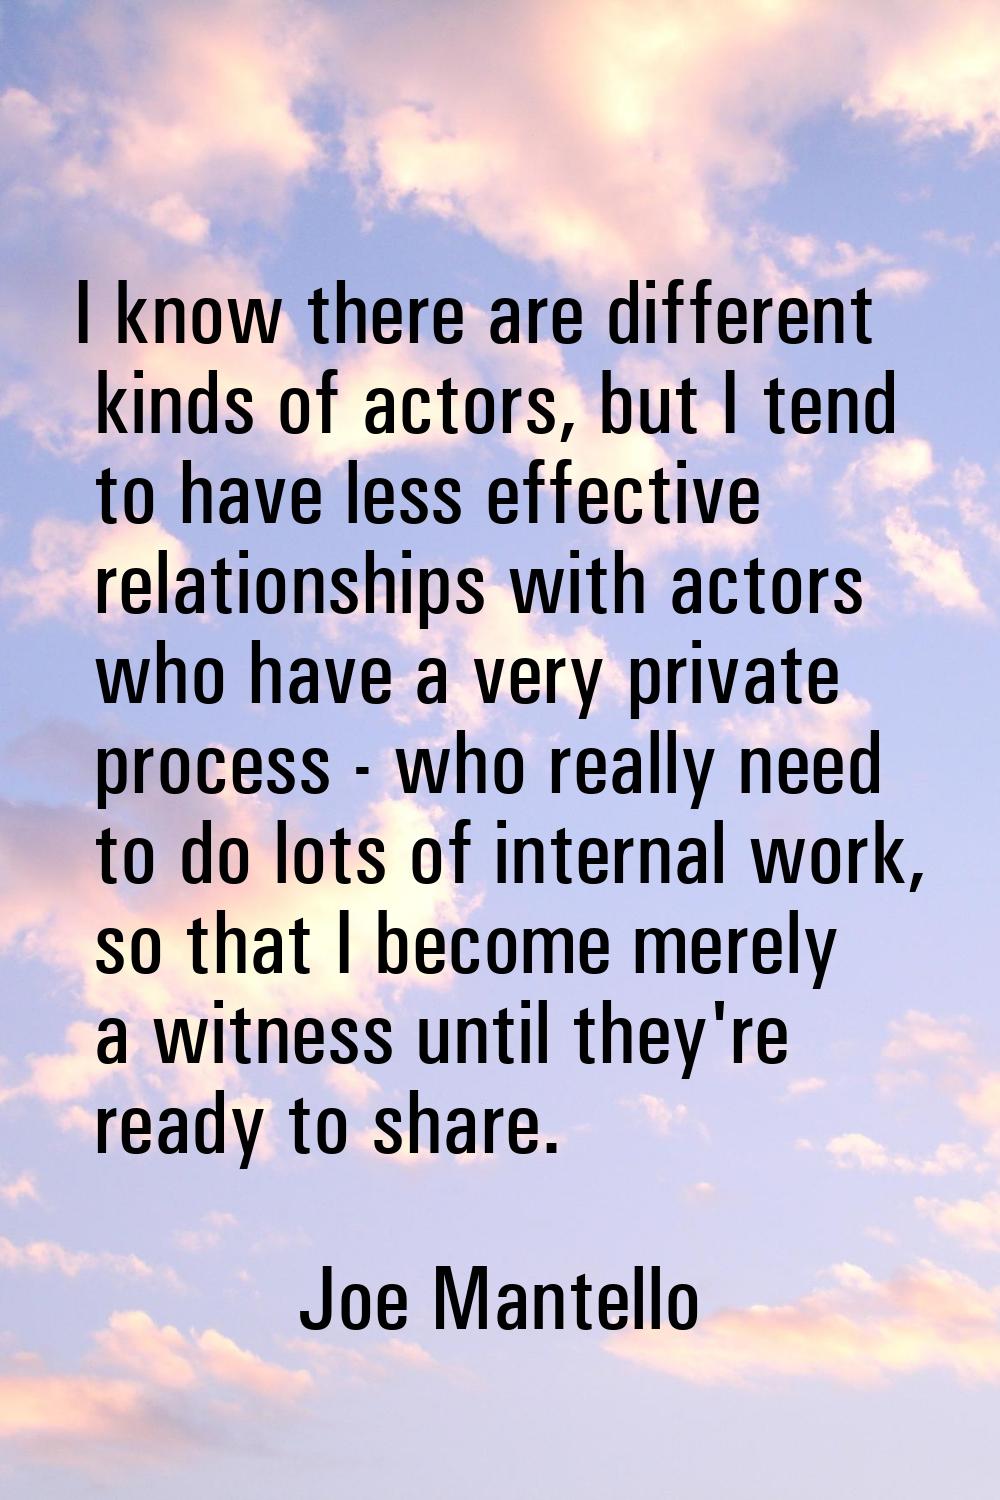 I know there are different kinds of actors, but I tend to have less effective relationships with ac